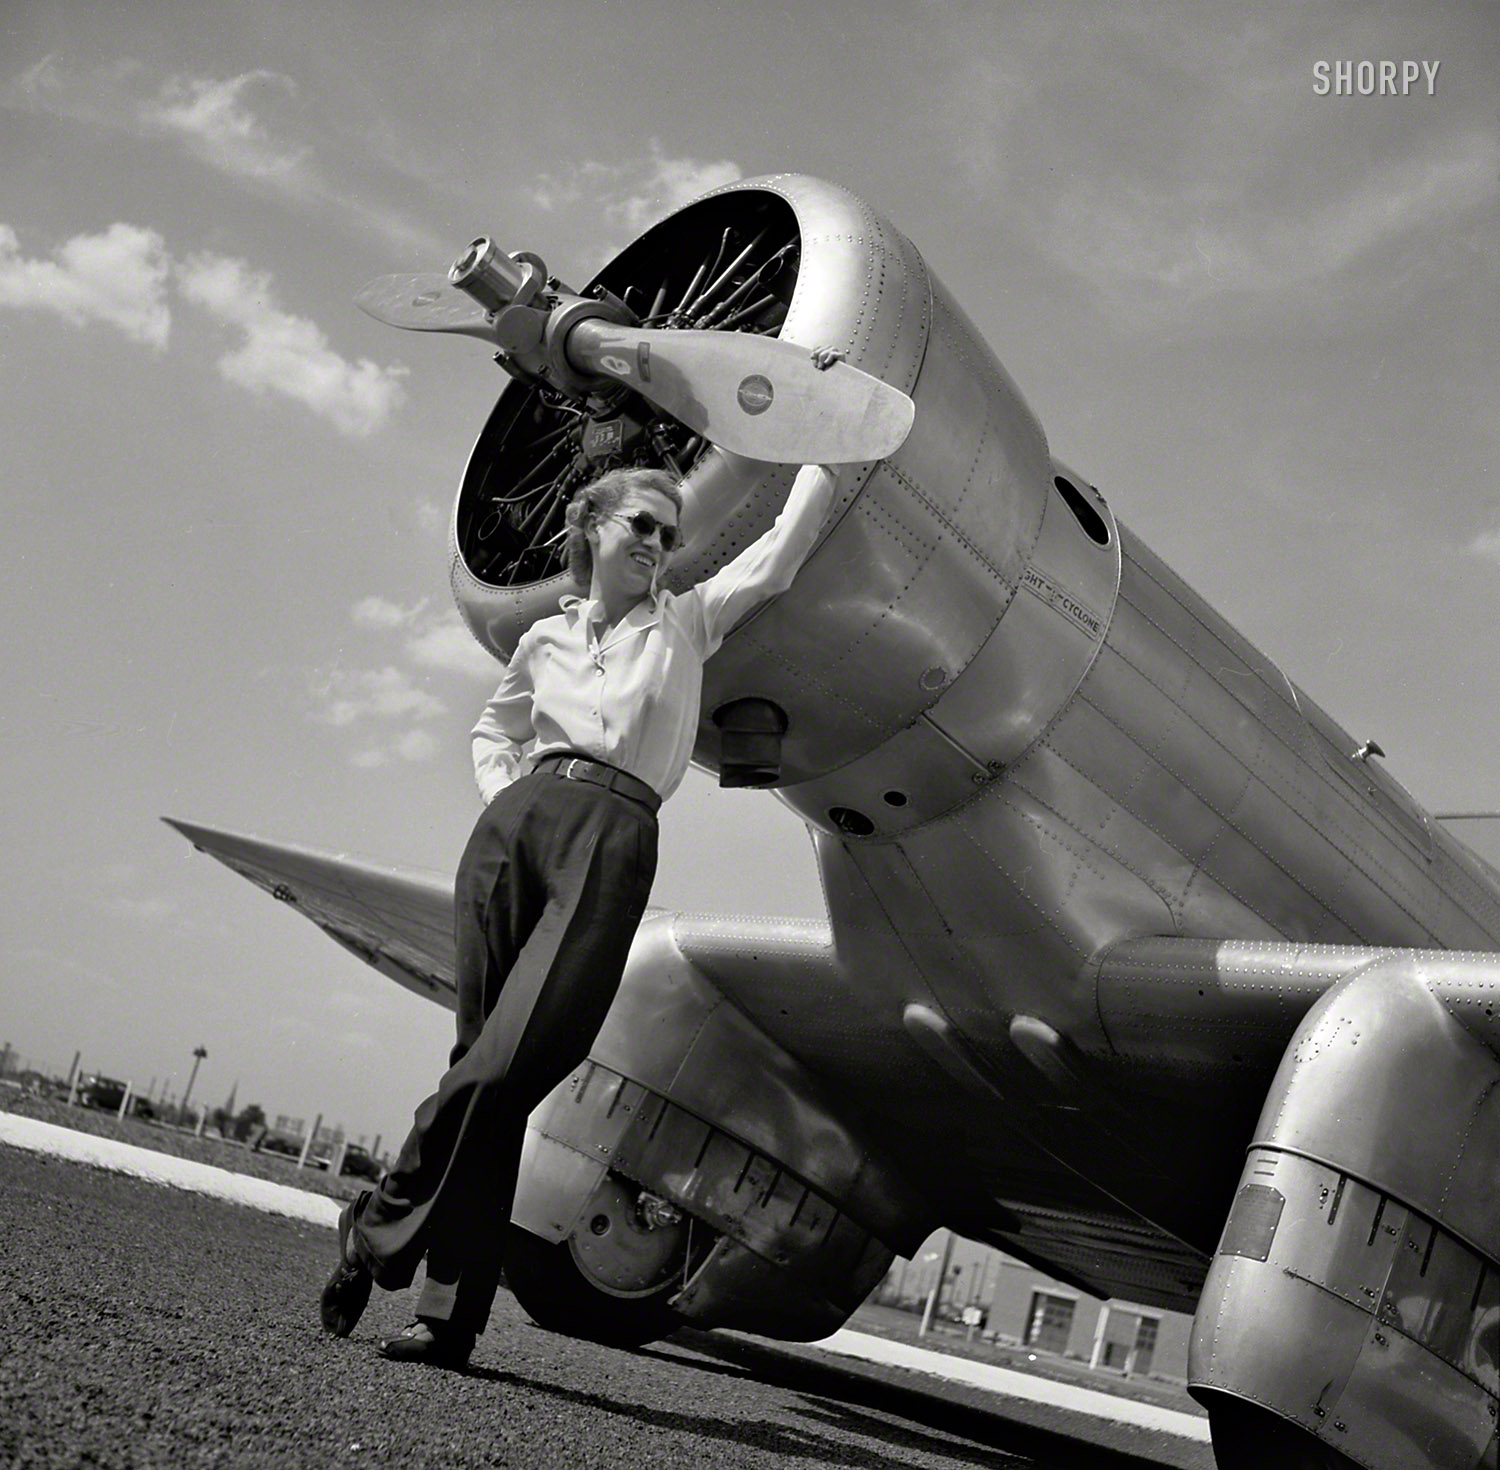 August 1939. "Pilot Jacqueline Cochran and Northrop 'Gamma' racing plane." Medium format negative by Toni Frissell for Vogue. View full size.